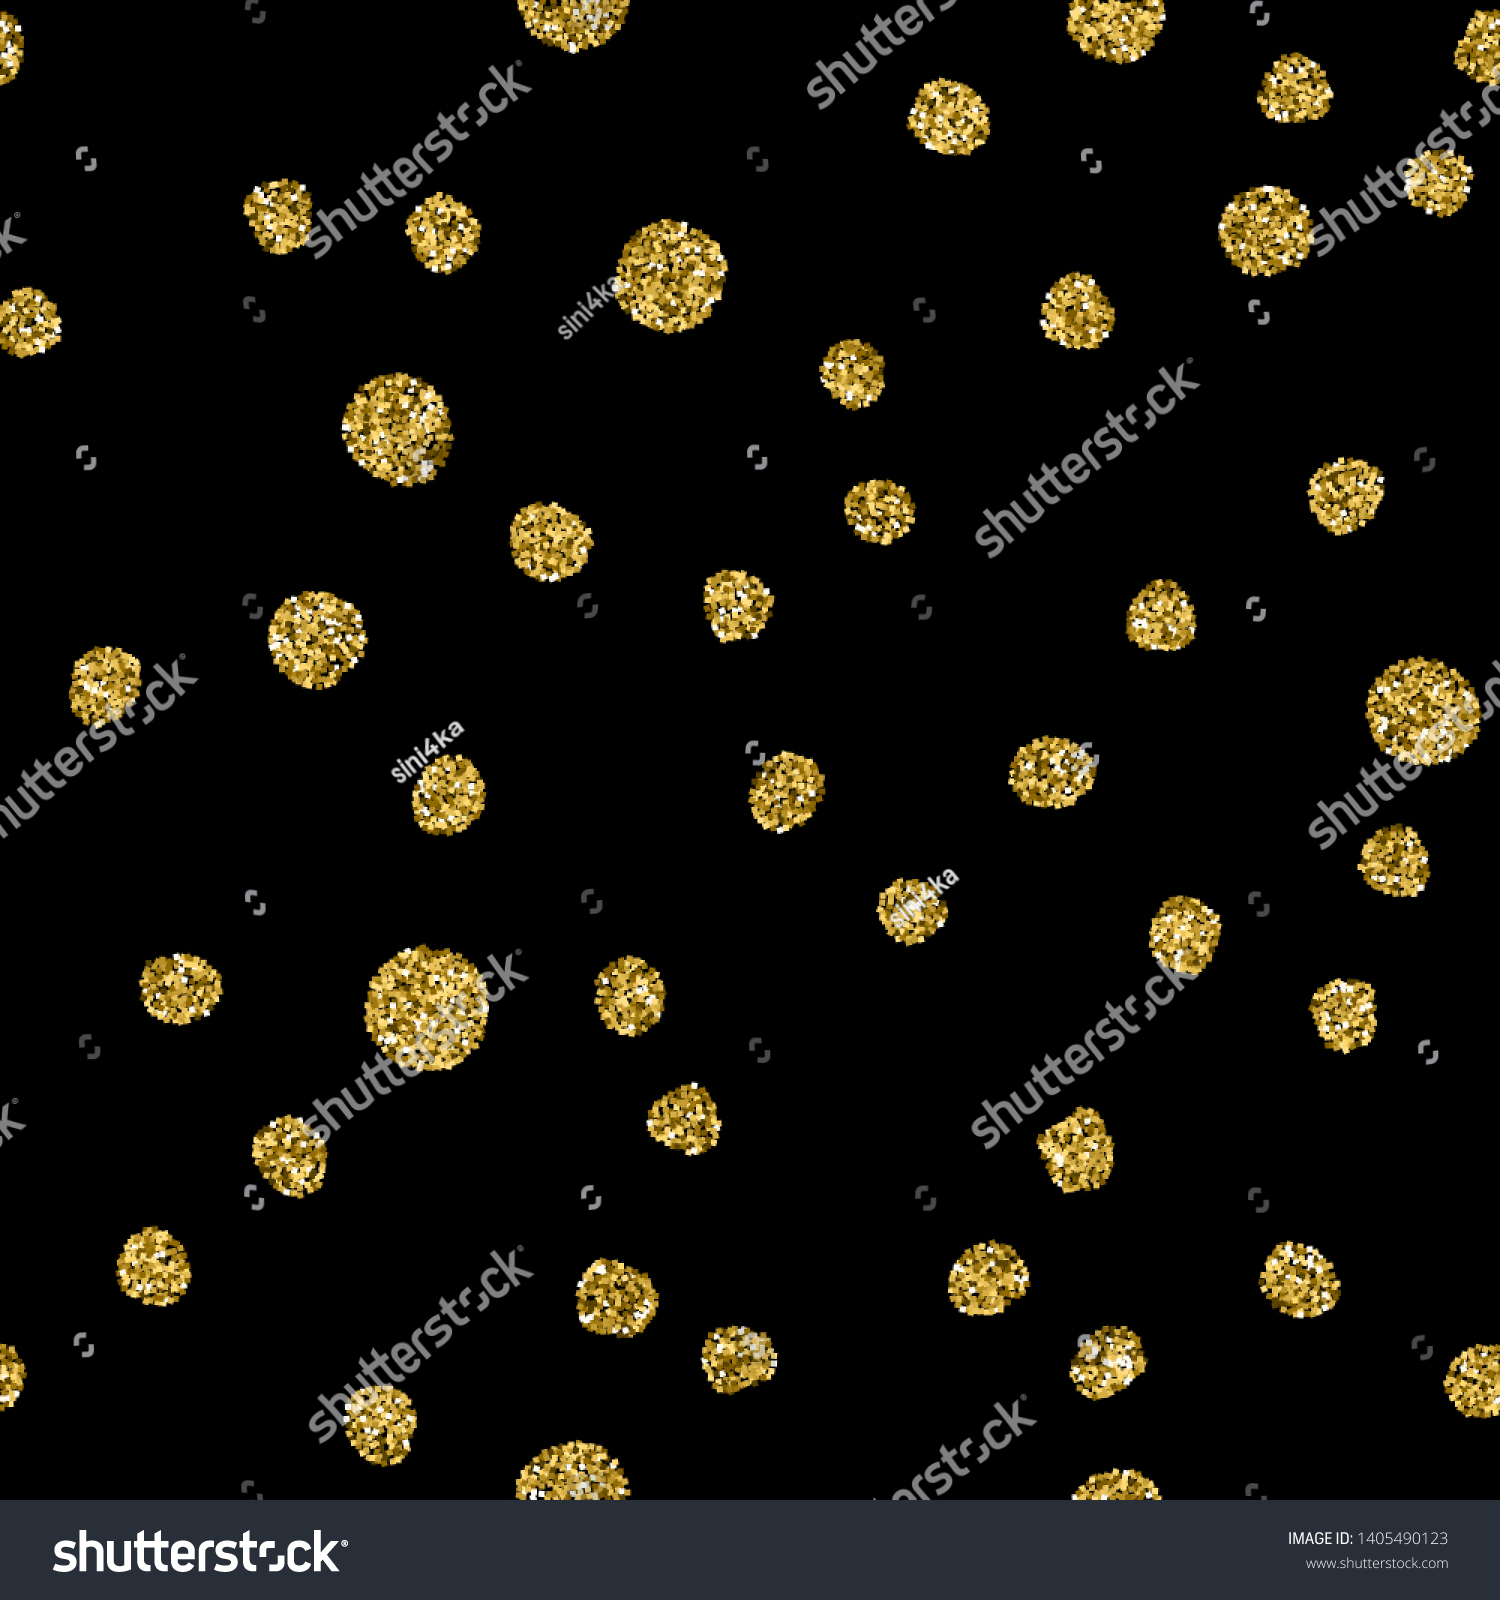 42,932 Black Gold Wrapping Paper Images, Stock Photos & Vectors ...